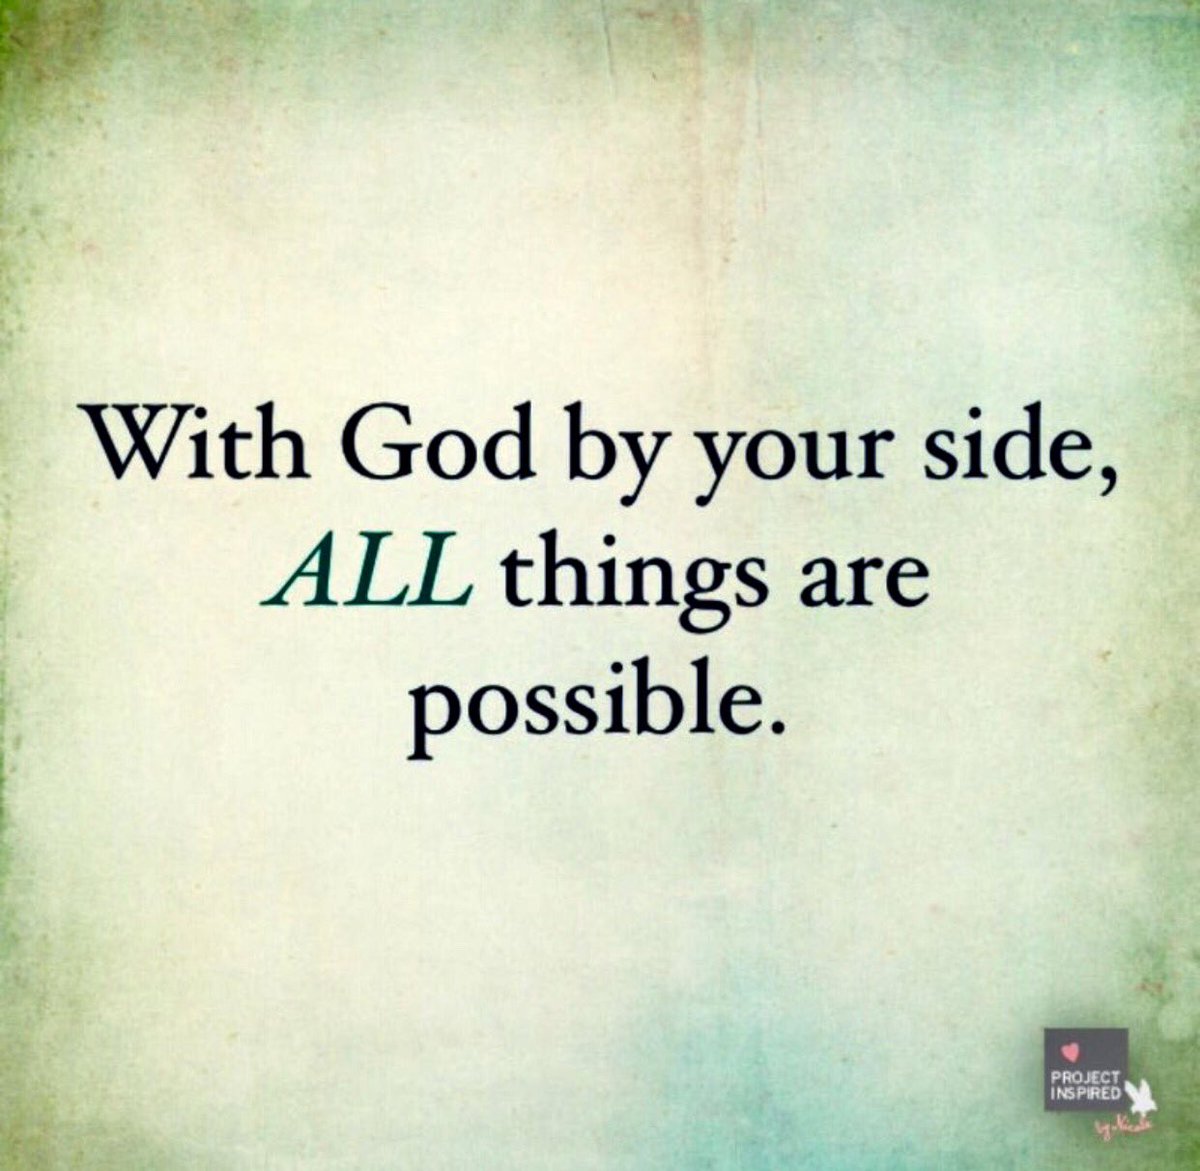 Image result for god by your side